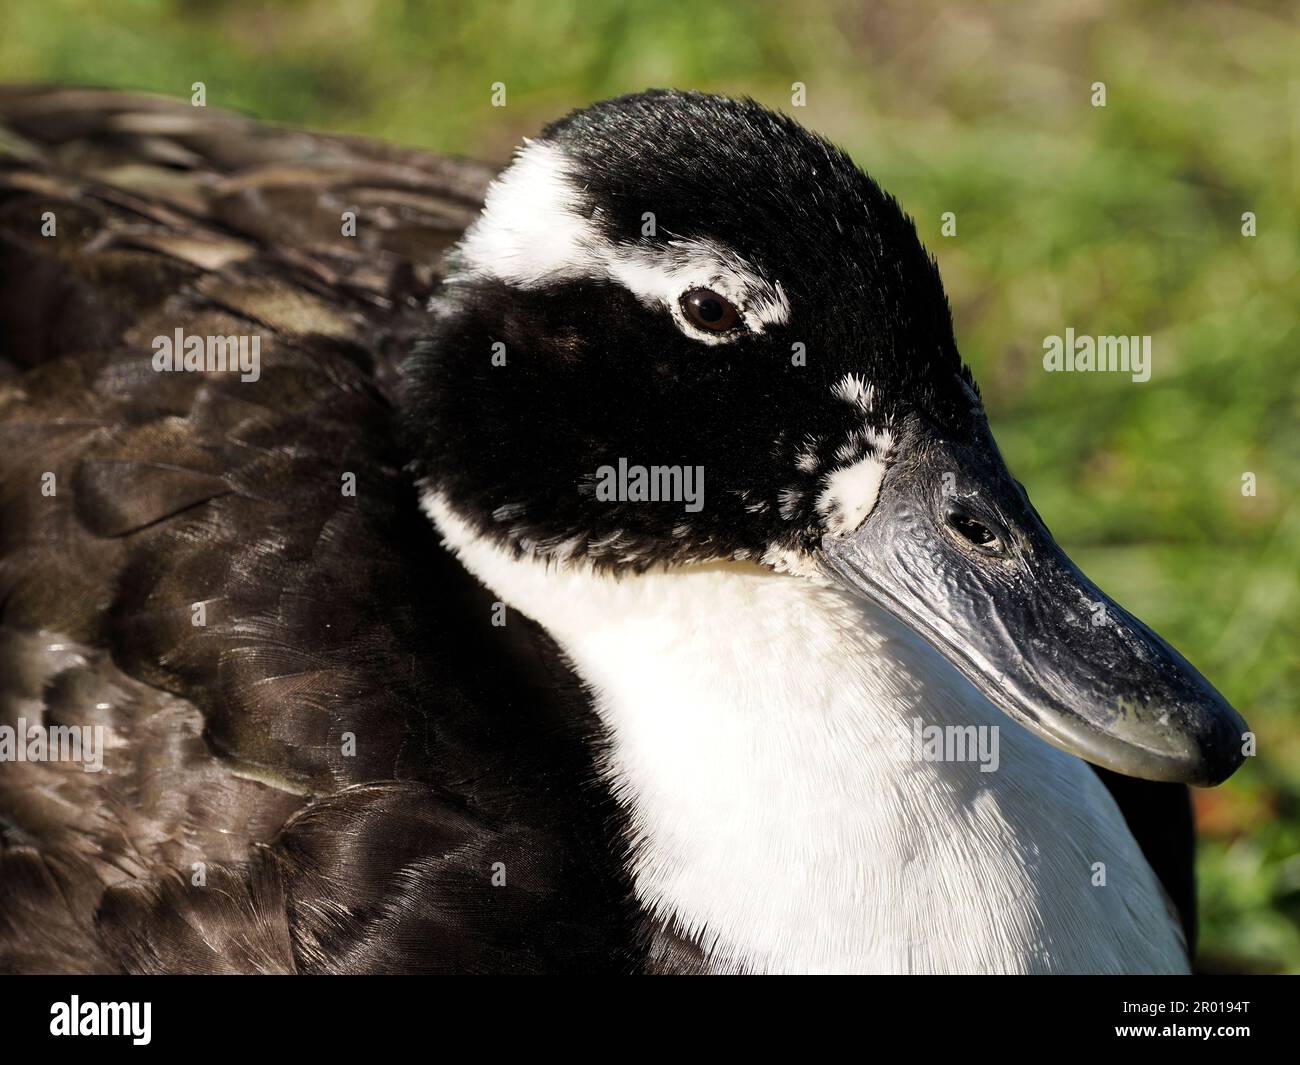 Duck with black head and white breastplate in bay of Somme ‘baie de Somme’ Stock Photo